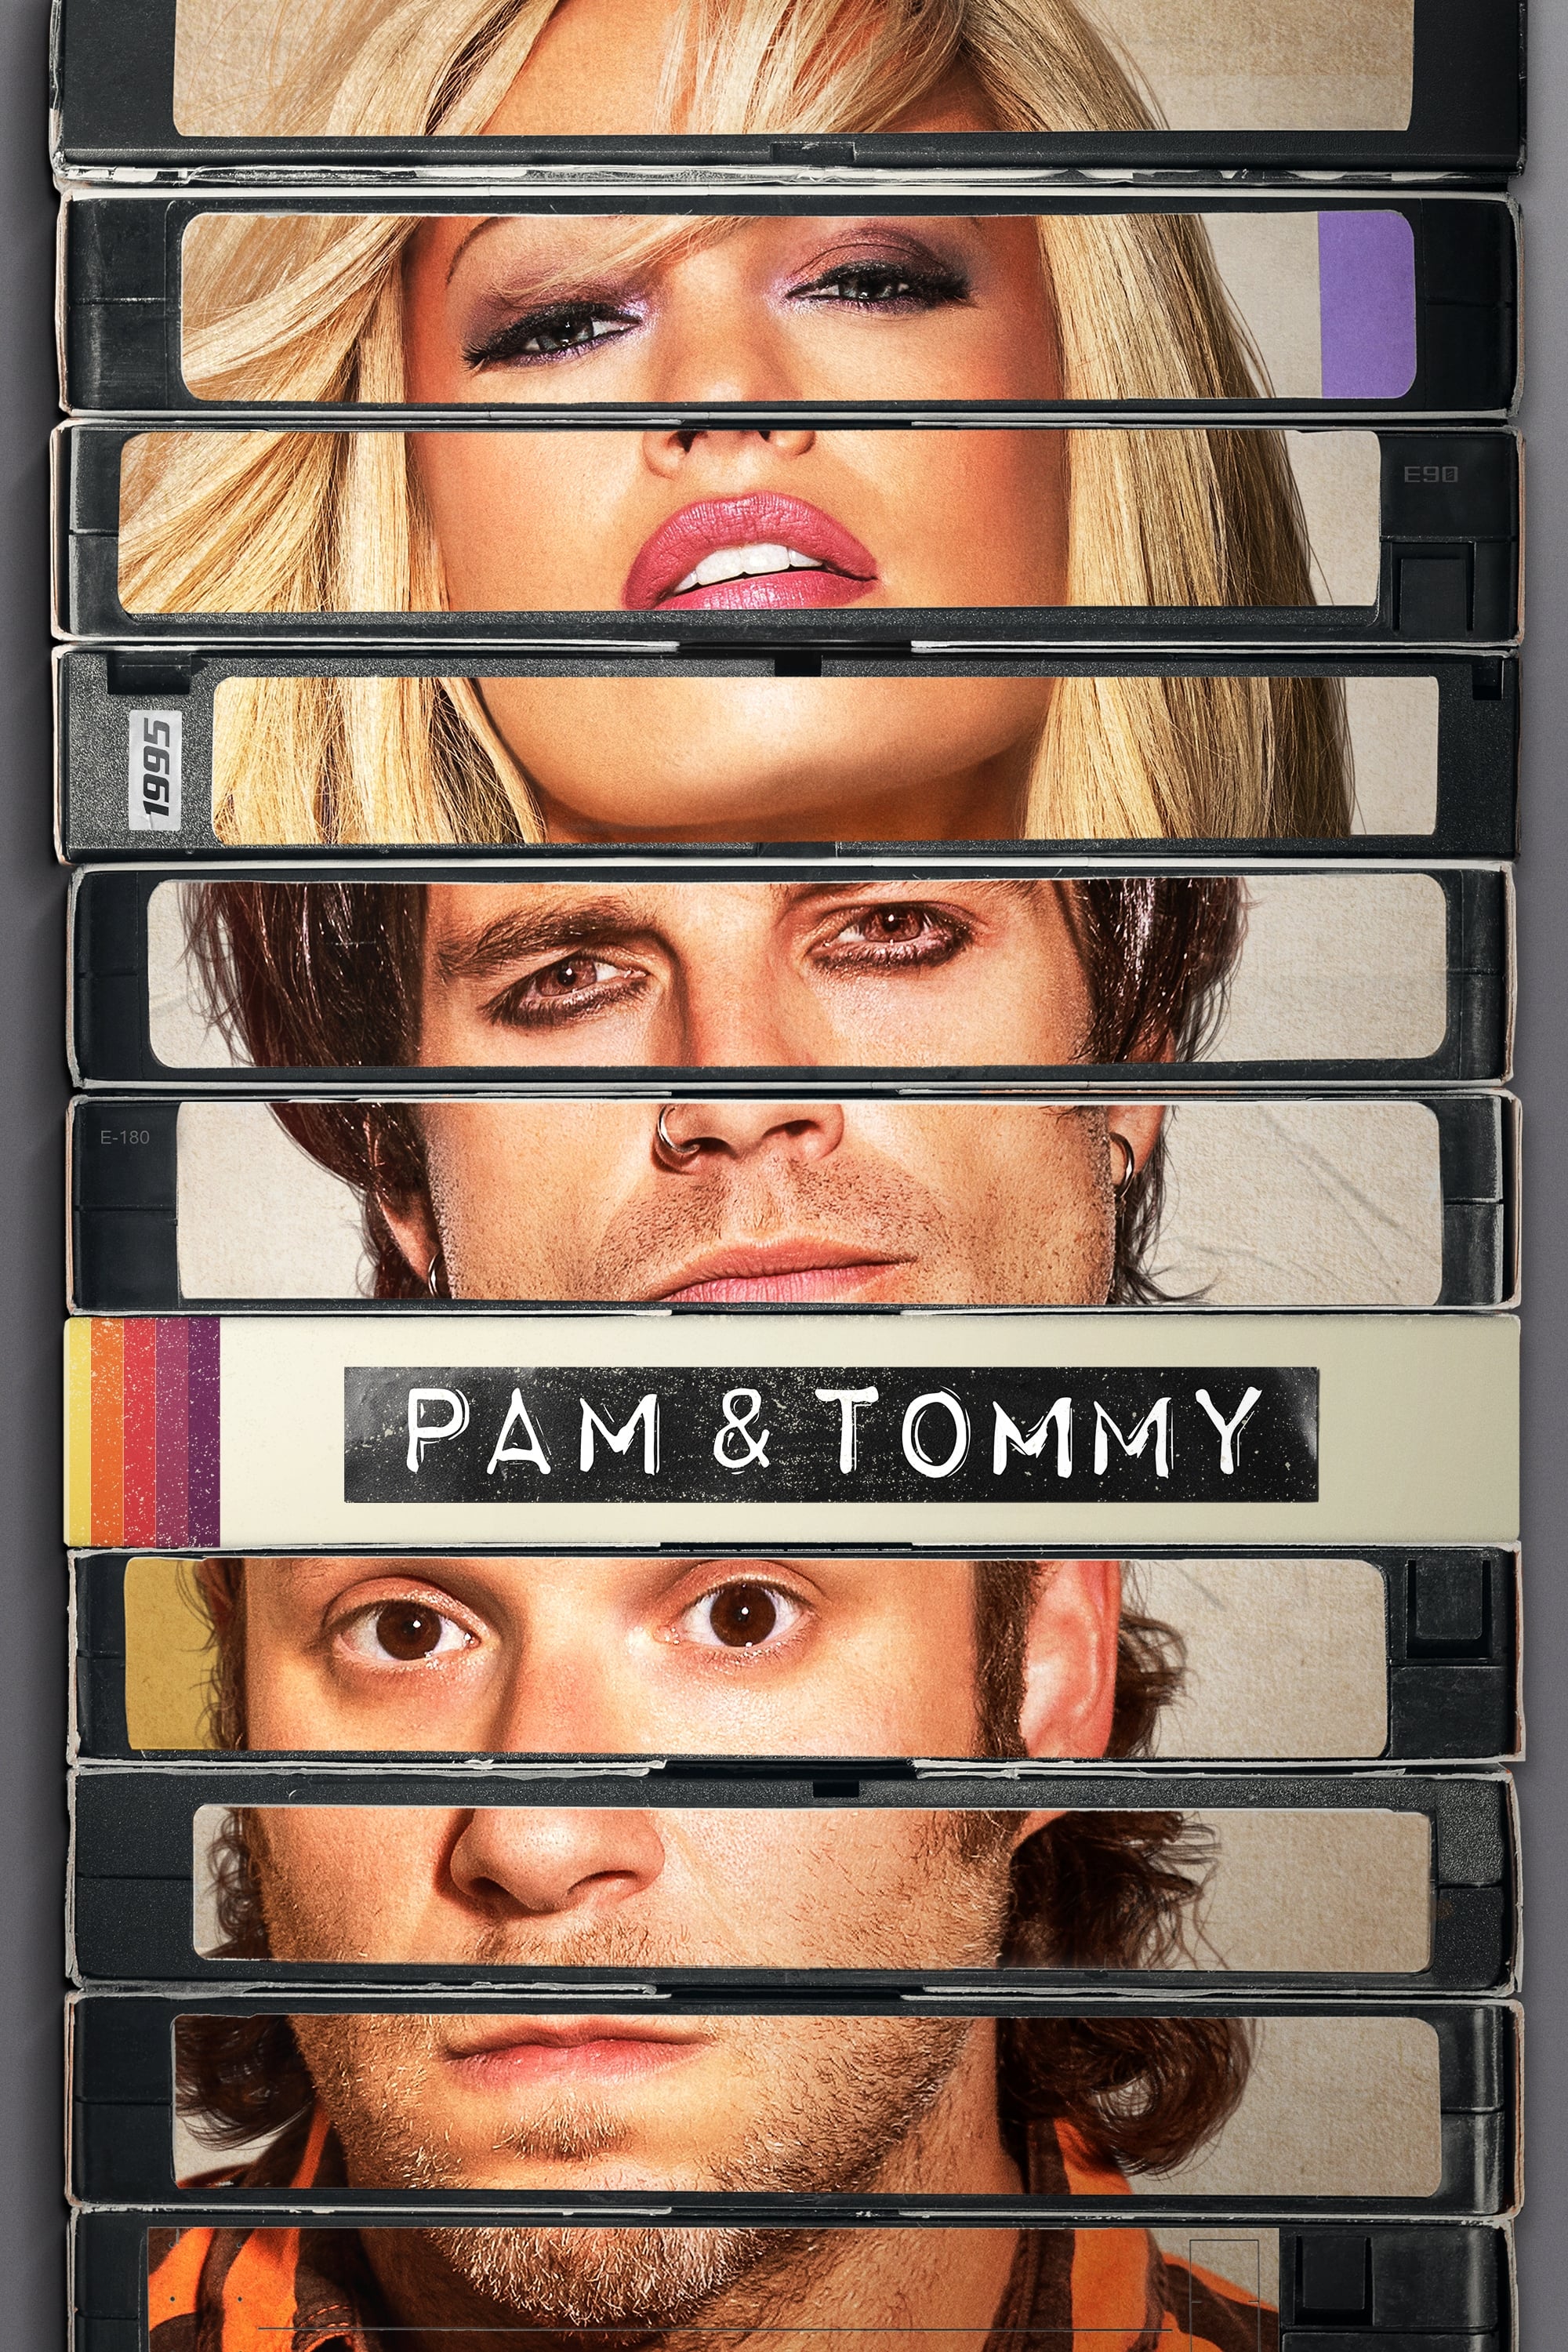 Pam & Tommy TV Shows About Based On True Story